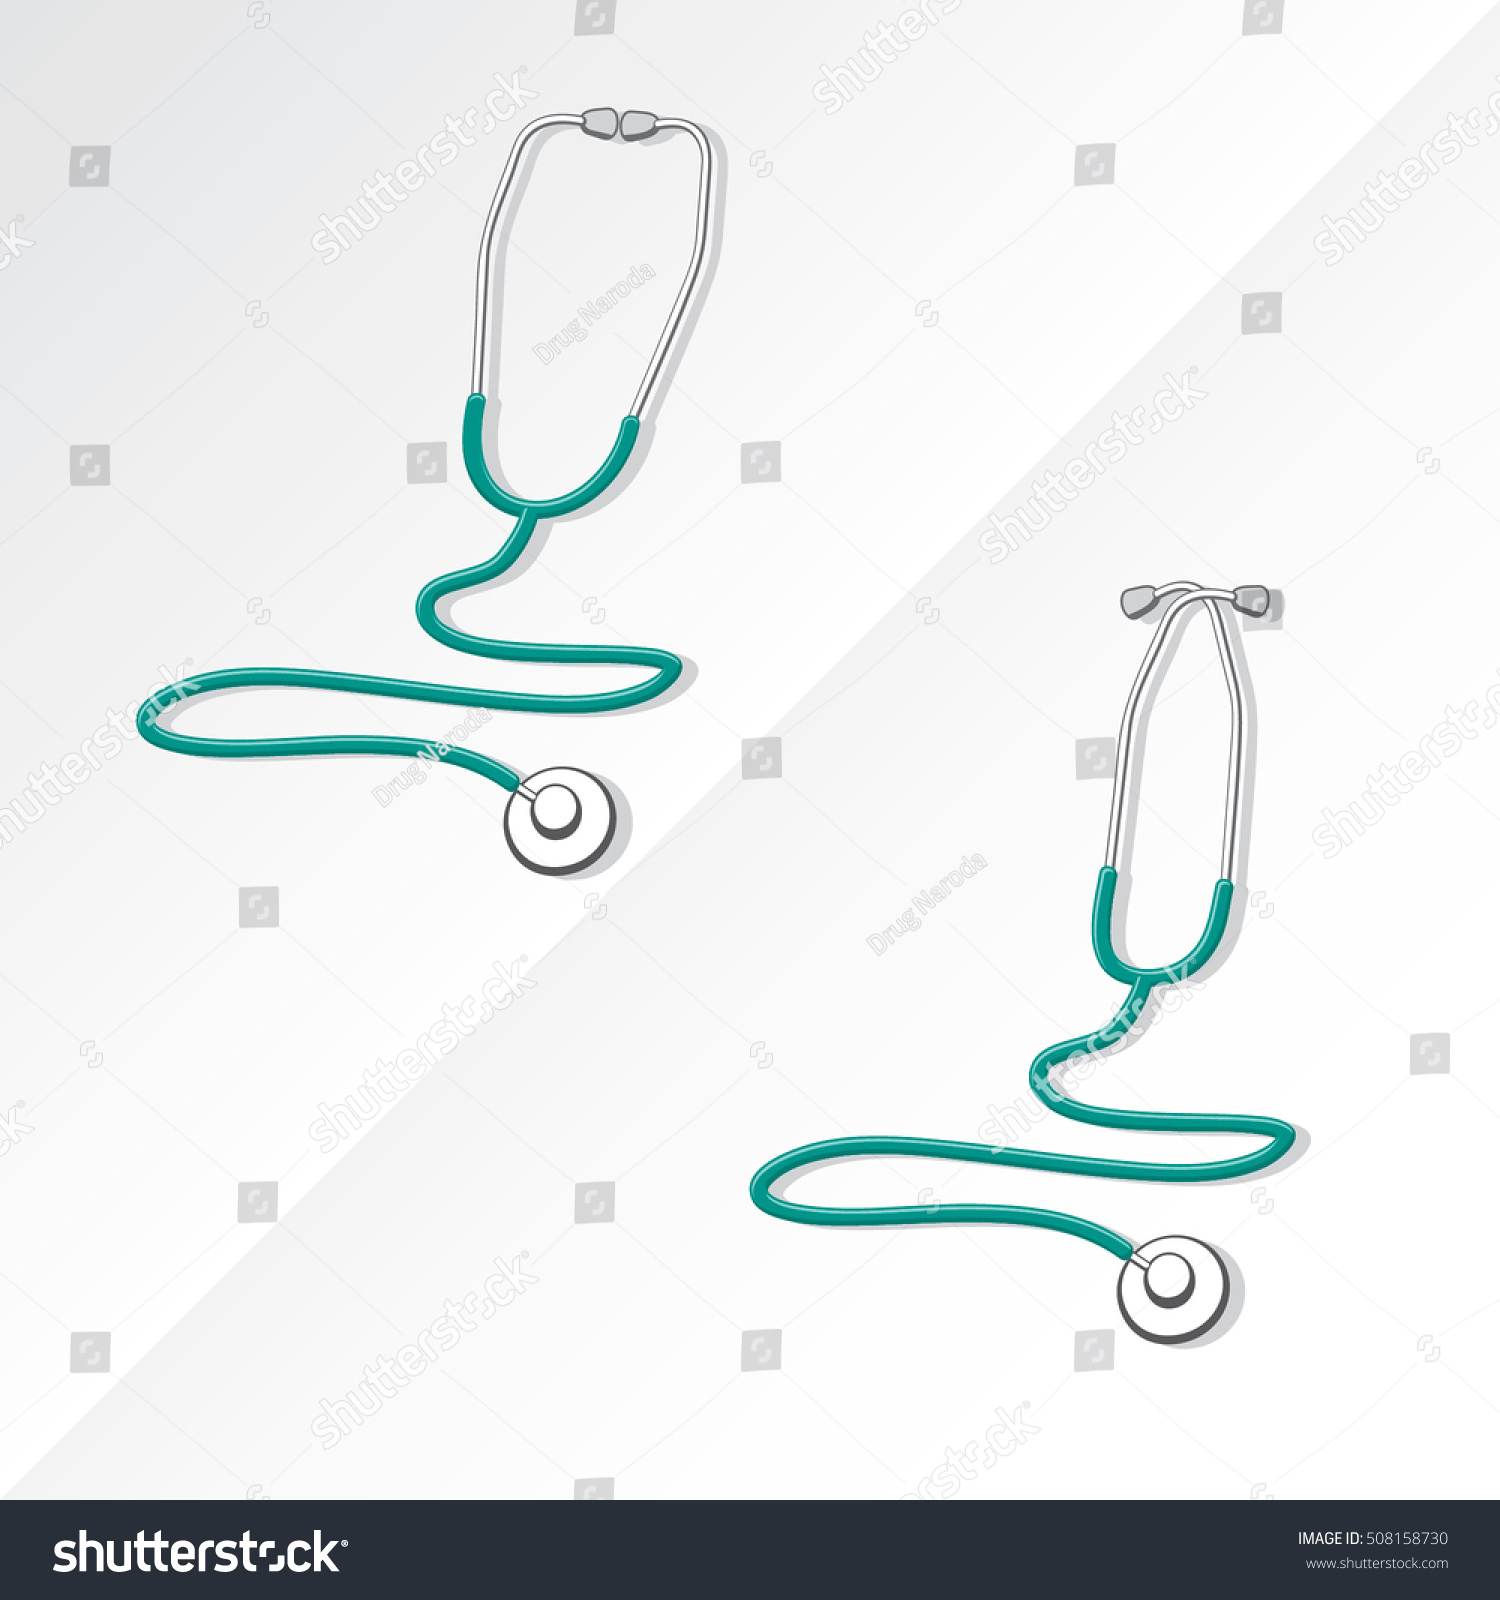 SVG of Two Medical Stethoscopes with Zigzag Shape Tubing Icons Set One with Crossed Binaural Another with Eartips Put Together - Grayscale and Turquoise Objects on White Background - Realistic Flat Design svg